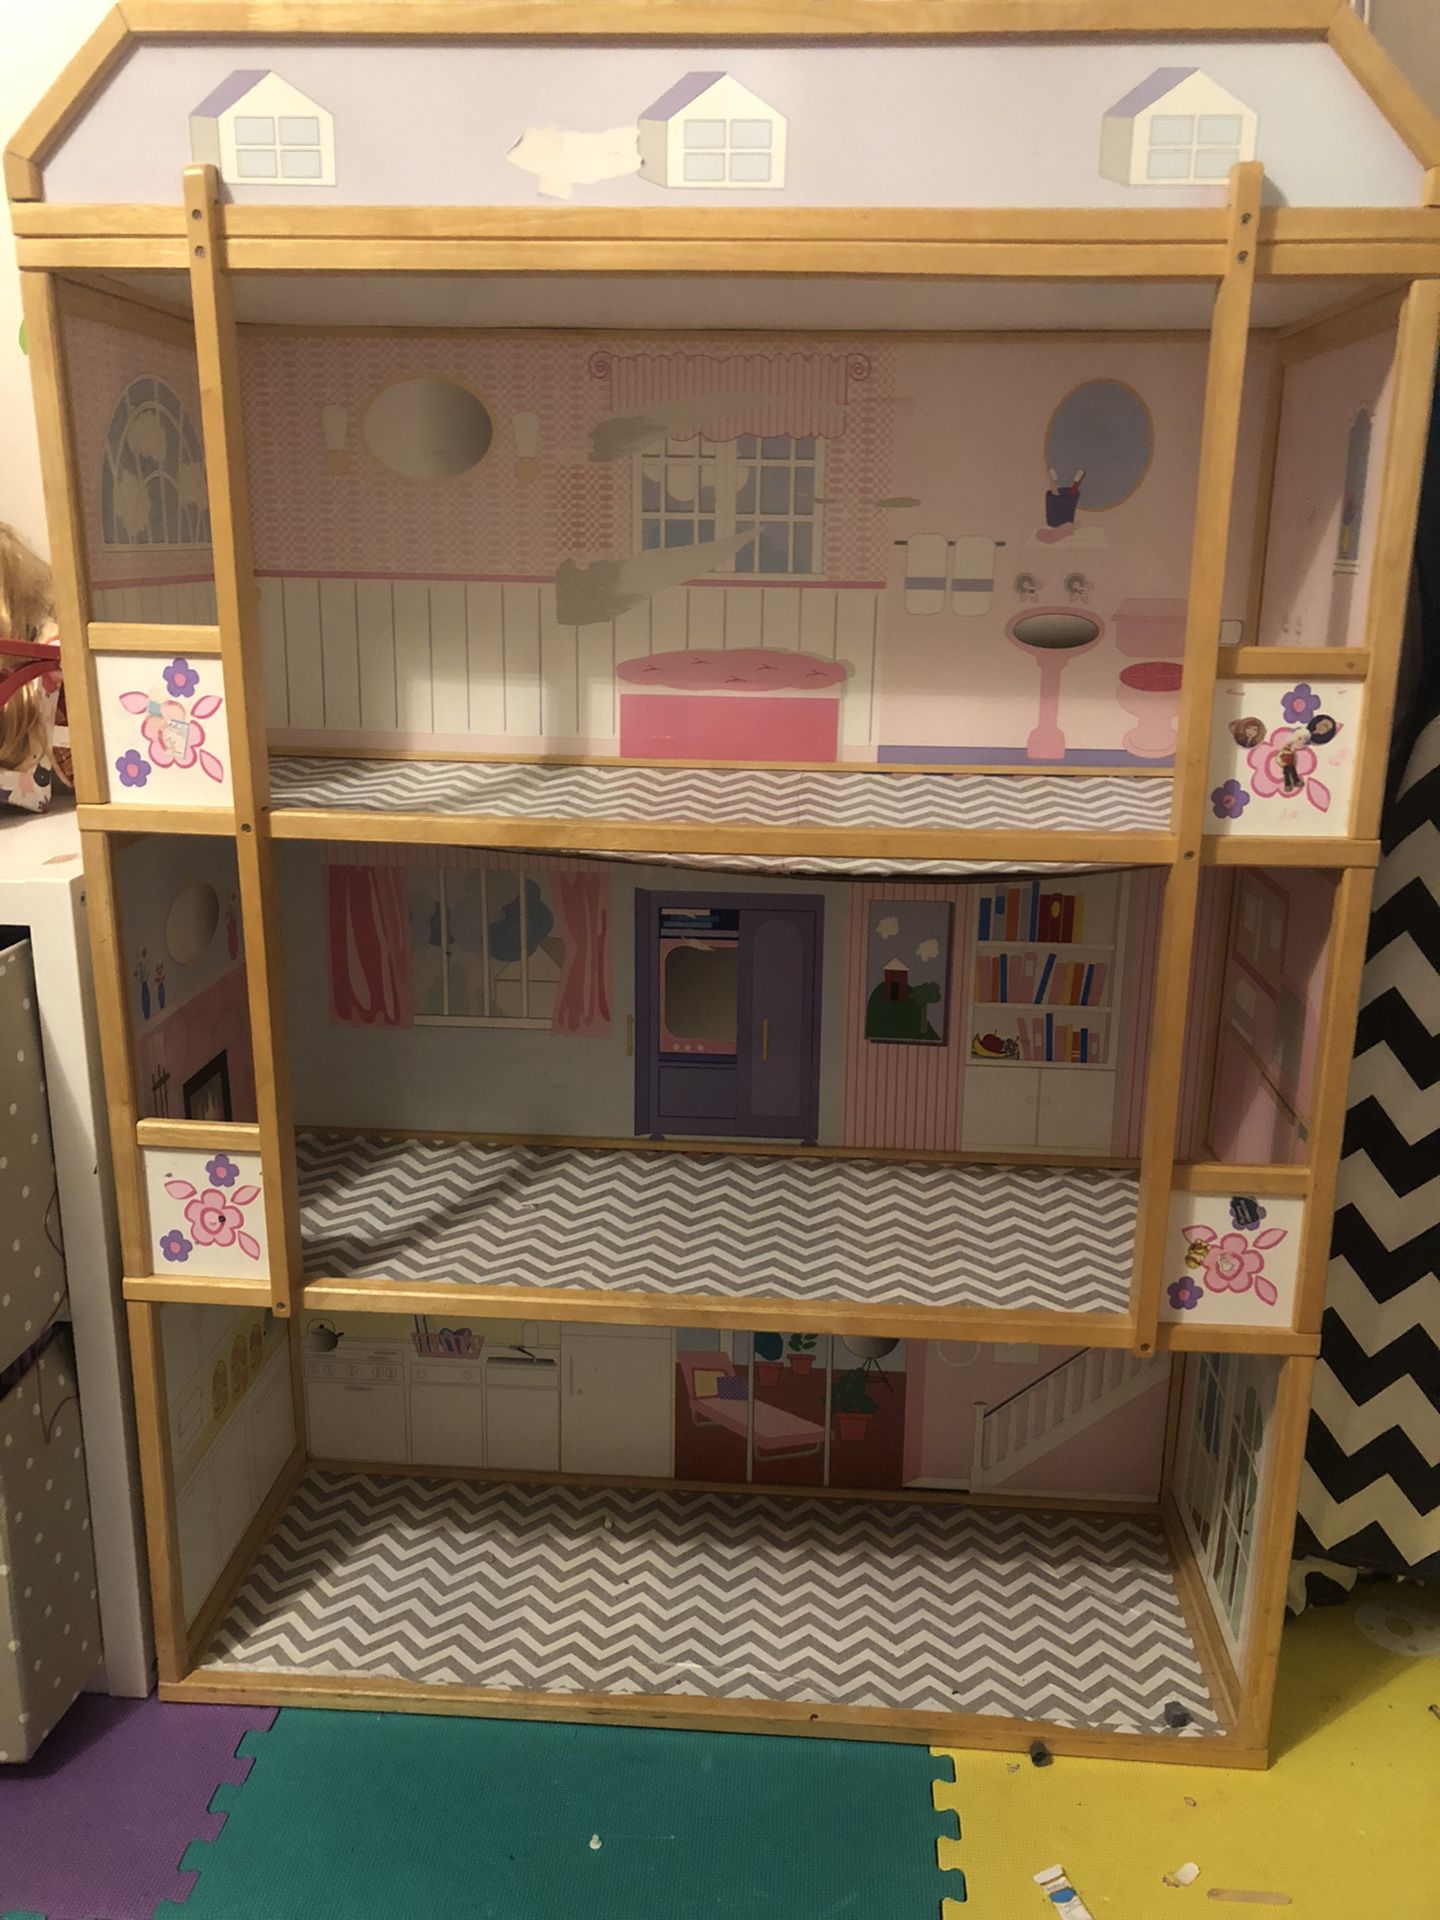 Gabby's Dollhouse Play Pack Grab And Go (10 Pack) for Sale in Miami  Gardens, FL - OfferUp